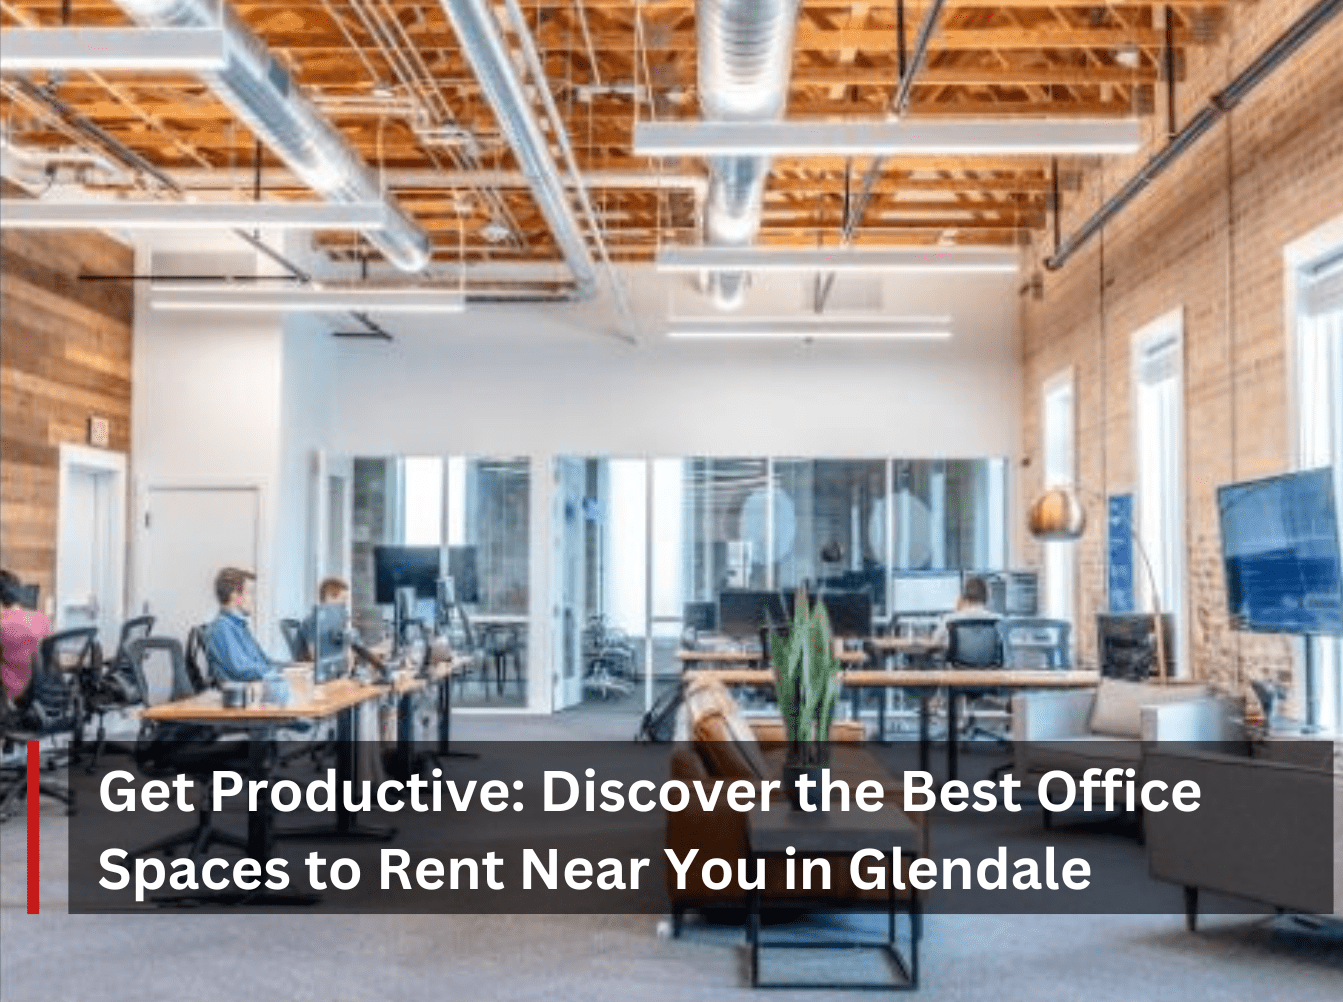 Get Productive: Discover the Best Office Spaces to Rent Near You in Glendale